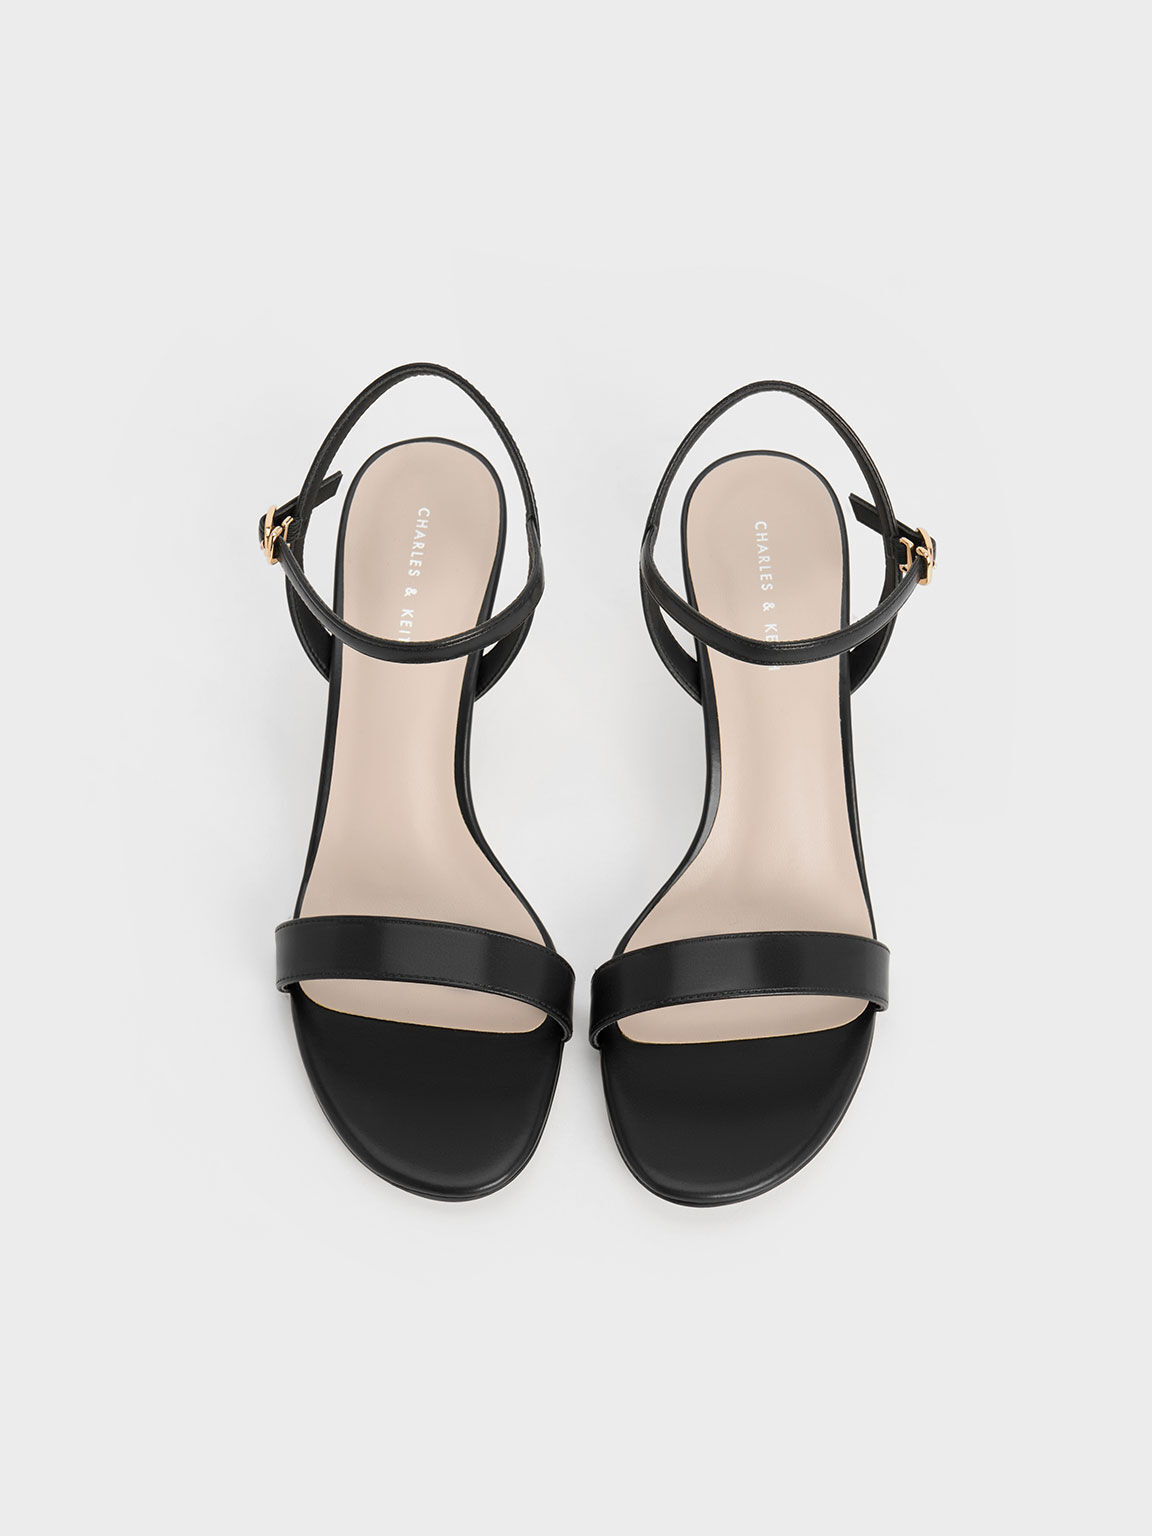 Charles & Keith Women's Clear Trapeze Heel Sandals